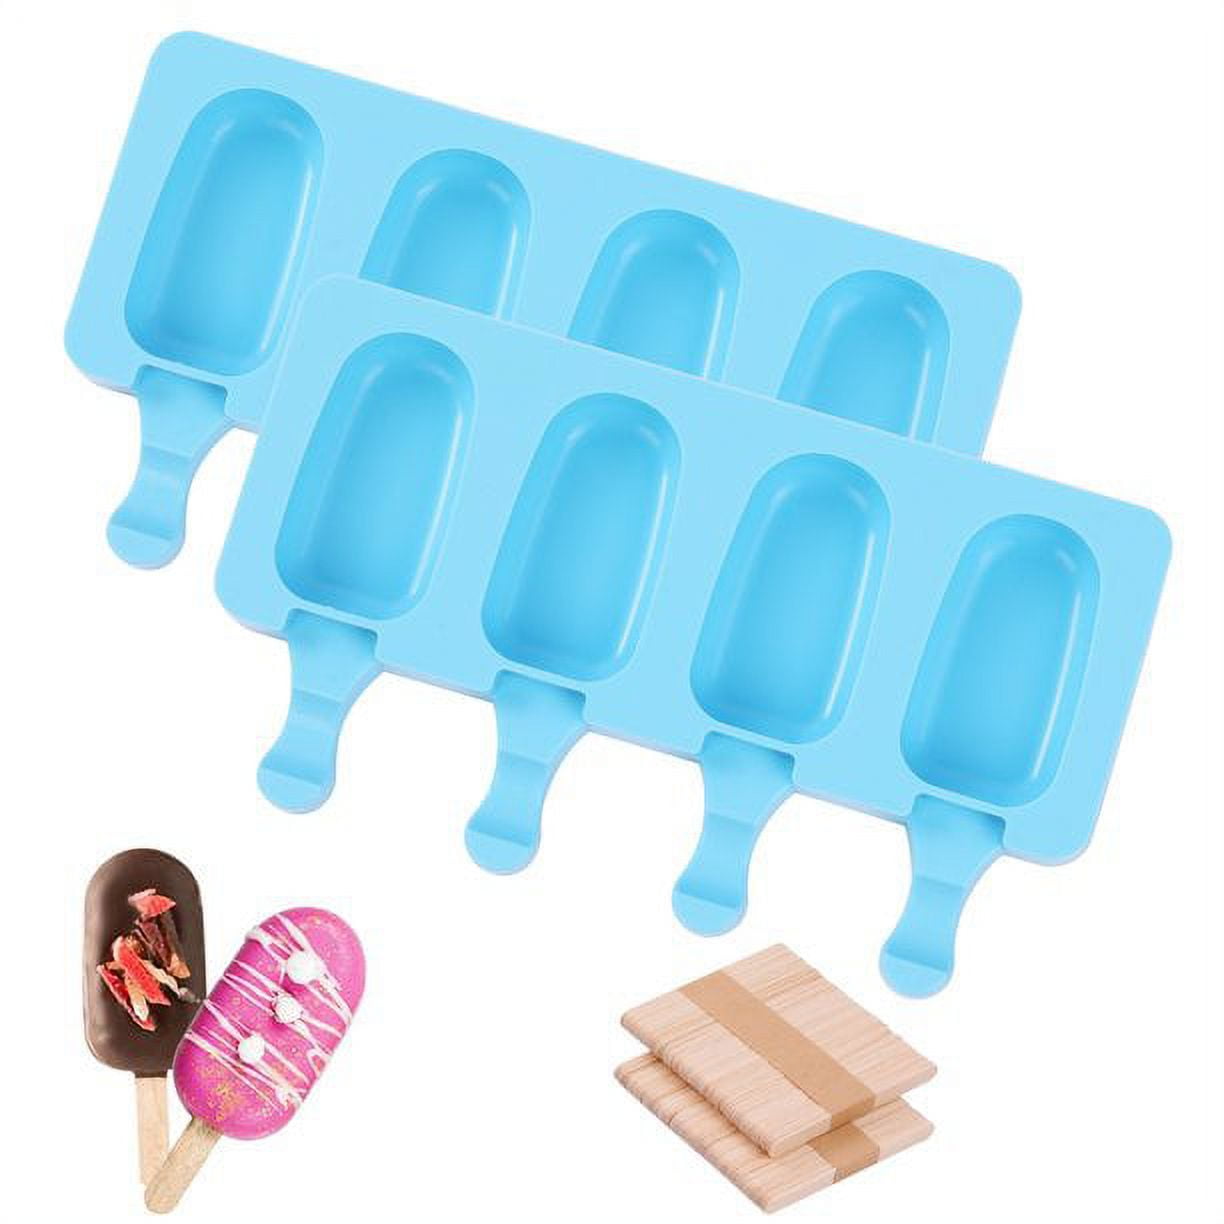 Restaurantware Pastry Tek Silicone Cylinder Popsicle Mold - 4-Compartment - 10 Count Box, White